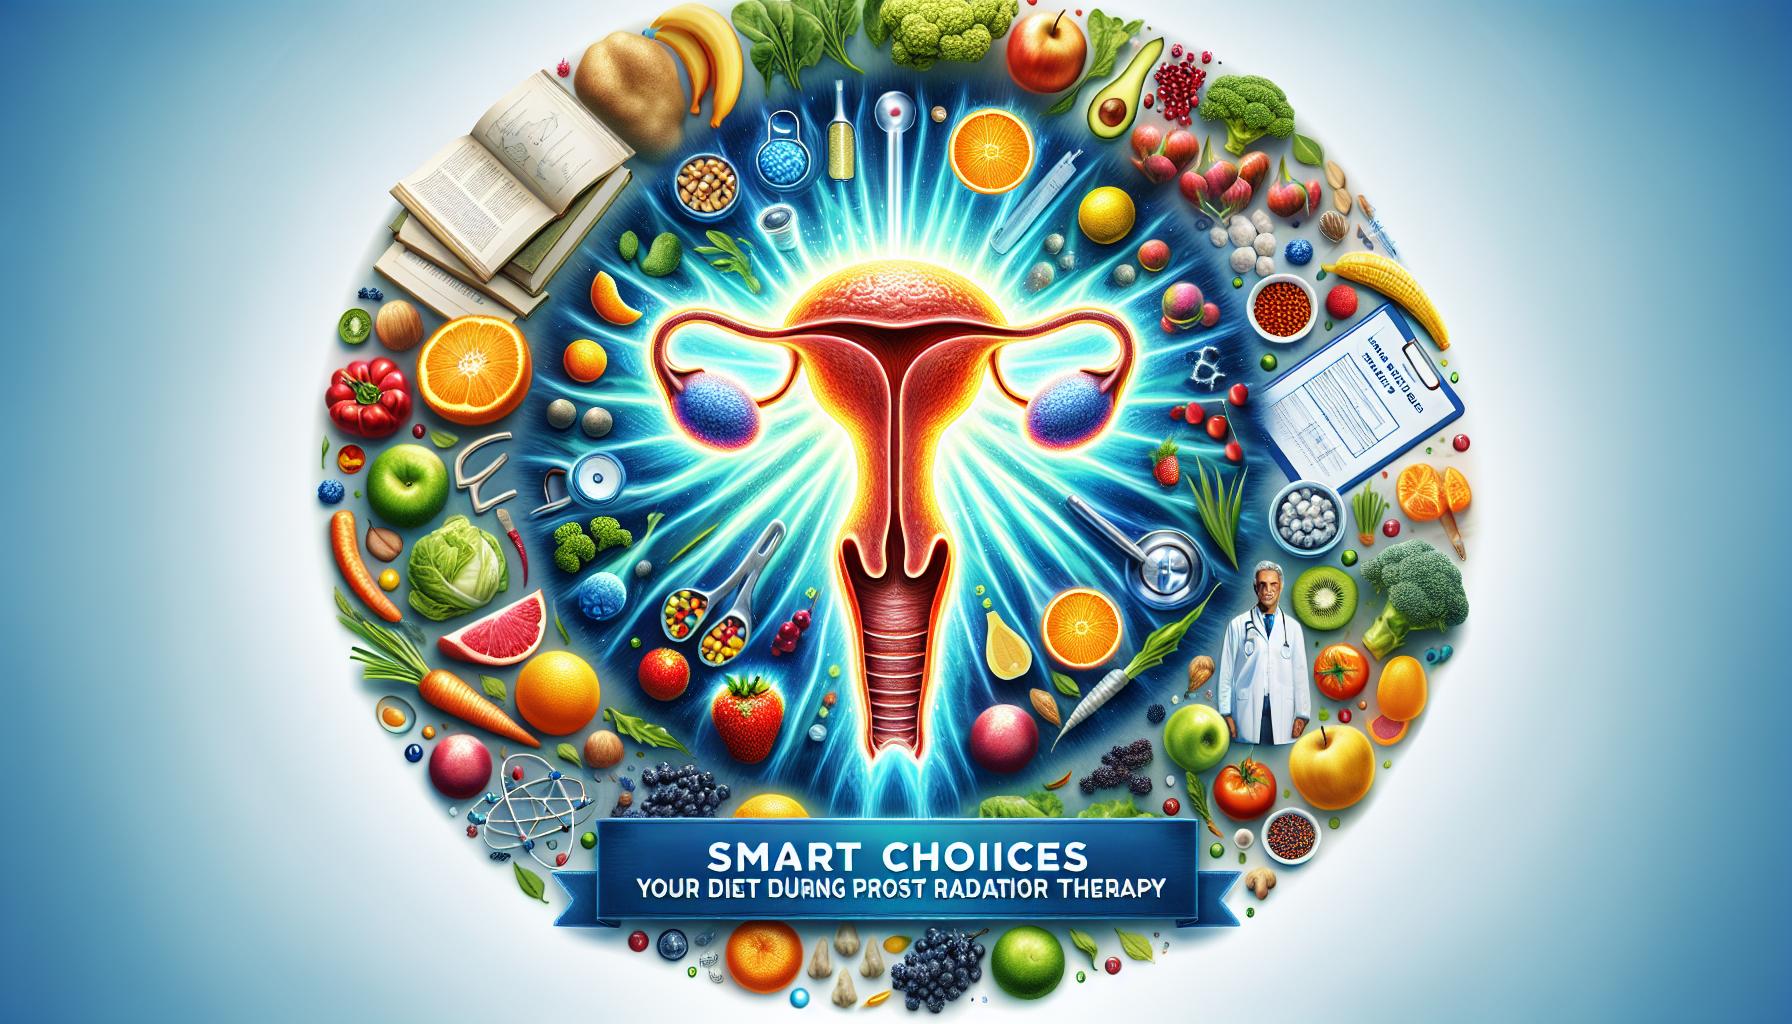 Smart Choices: Your Diet During Prostate Radiation Therapy Guide